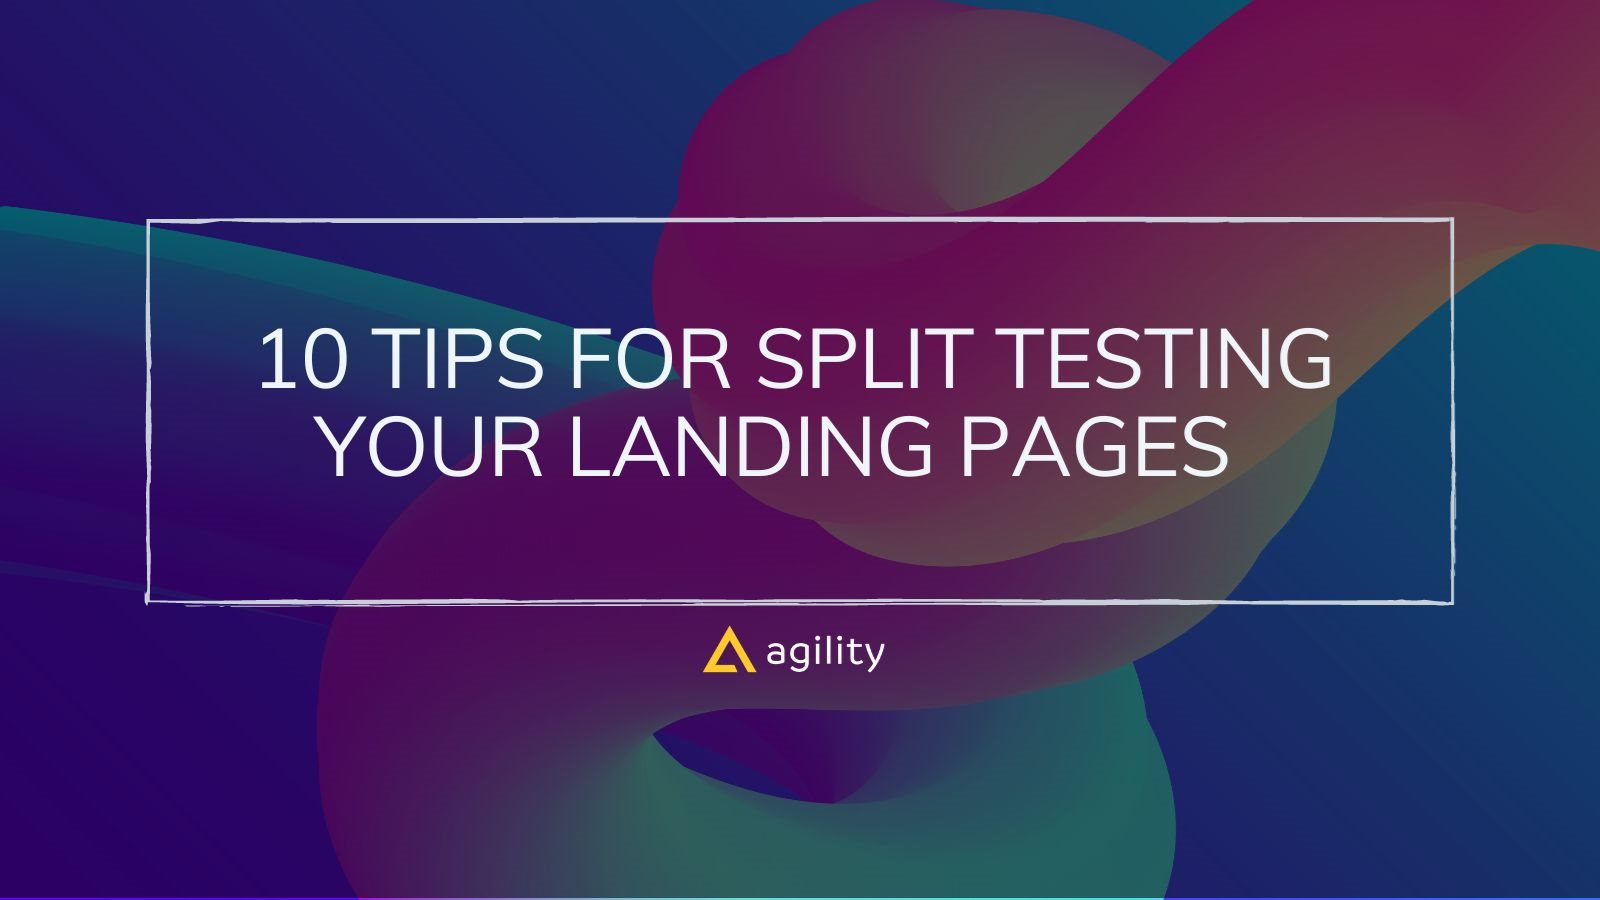 10 Tips for Split Testing Your Landing Pages